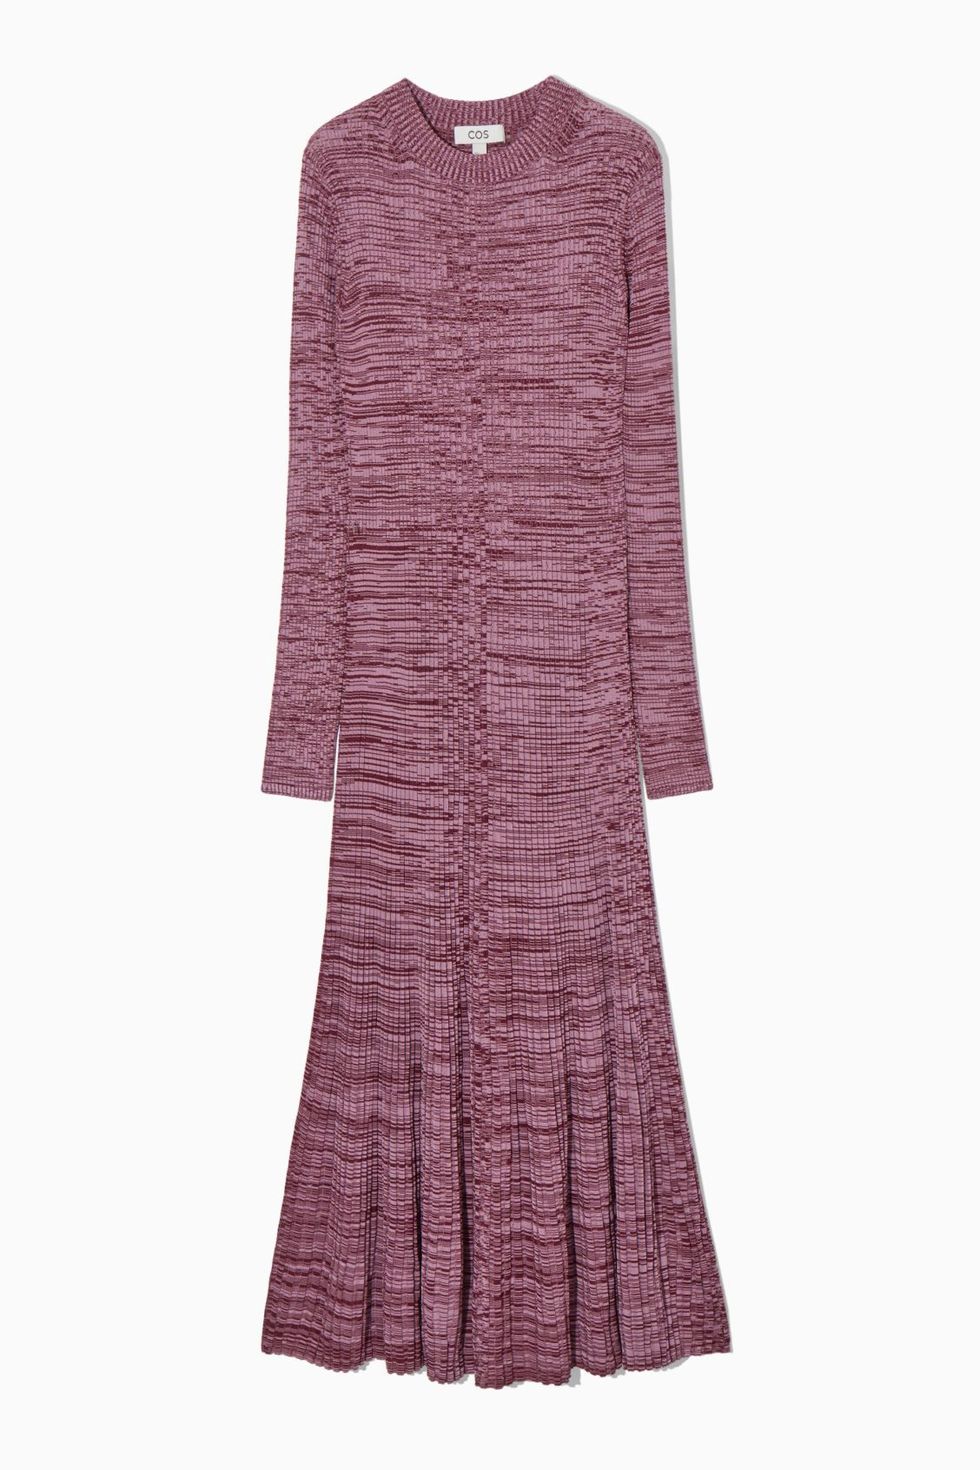 Trinny Woodall has found the perfect knitted dress